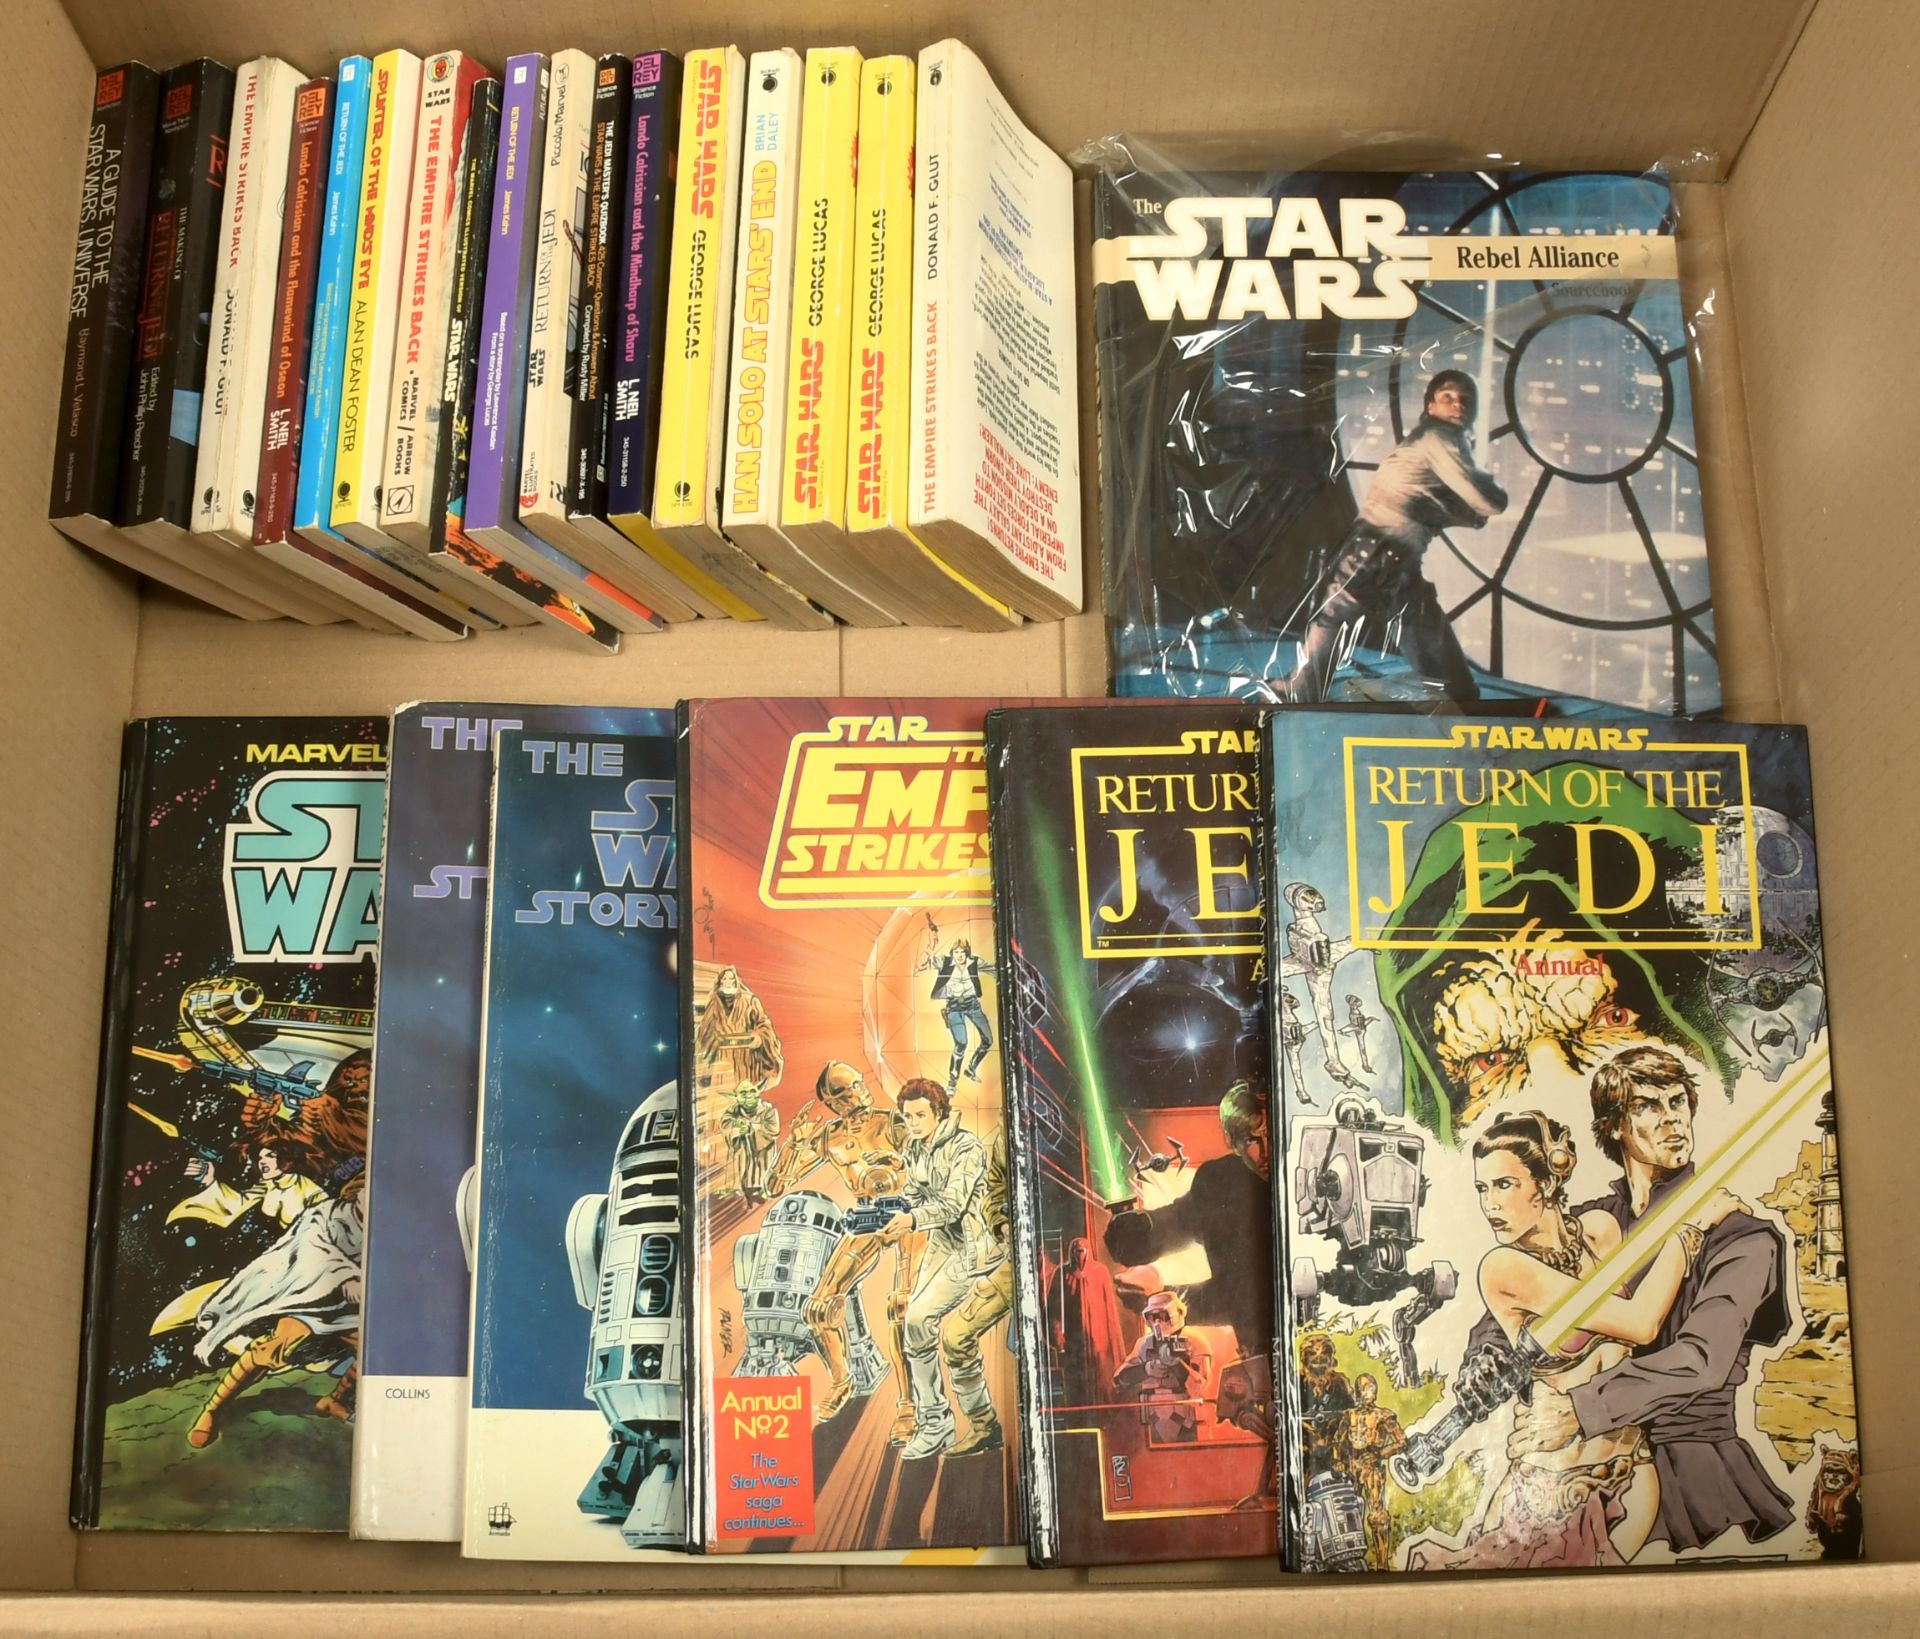 Star Wars related books x 29